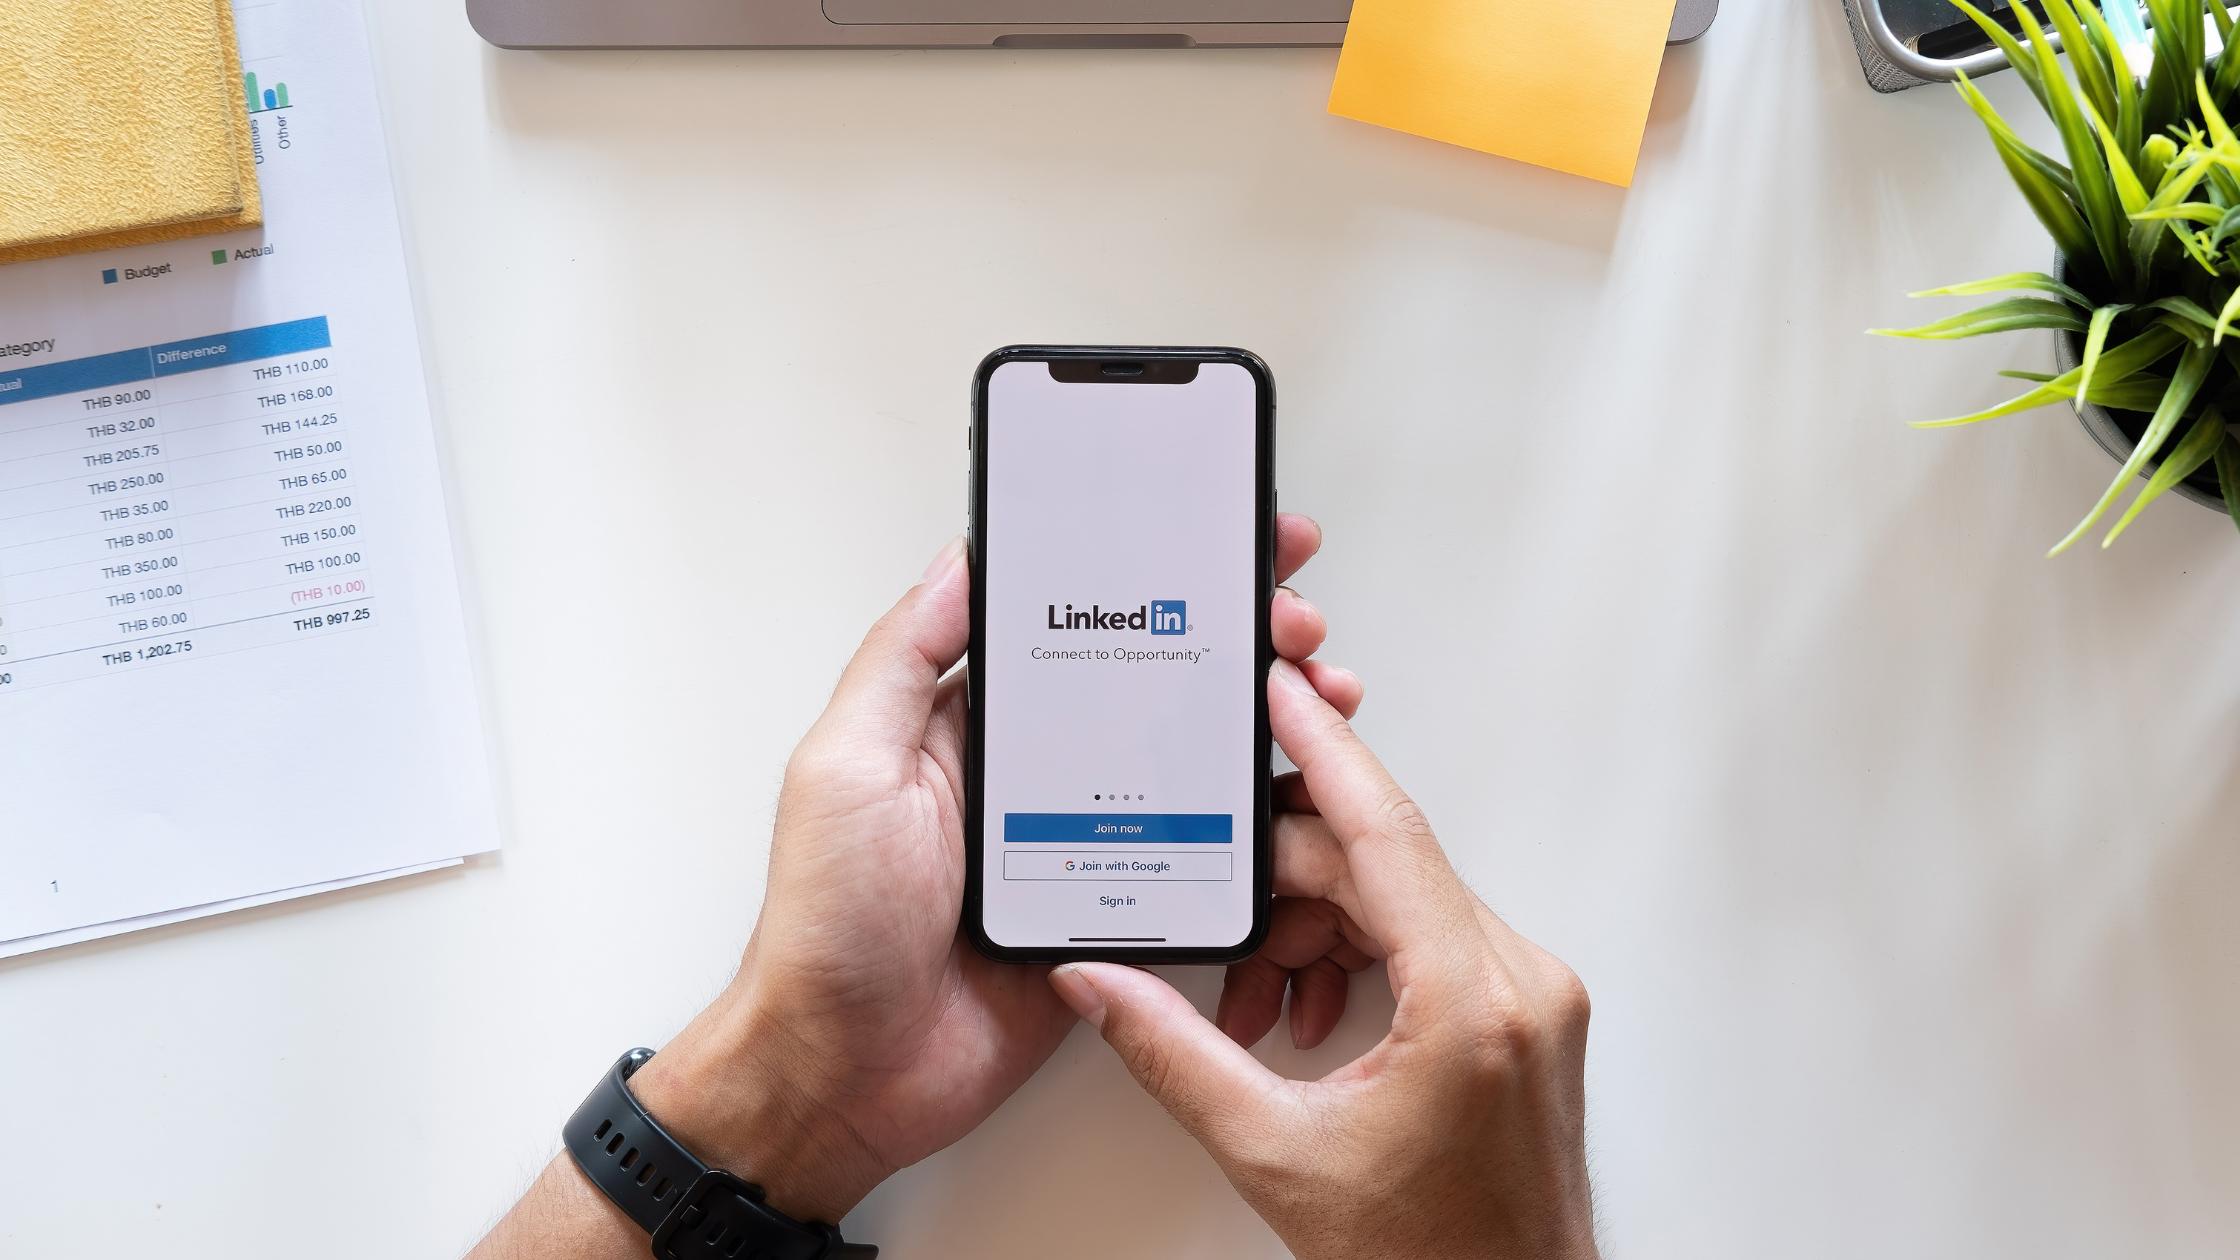 What Is LinkedIn & How Do I Use It? A Guide To LinkedIn